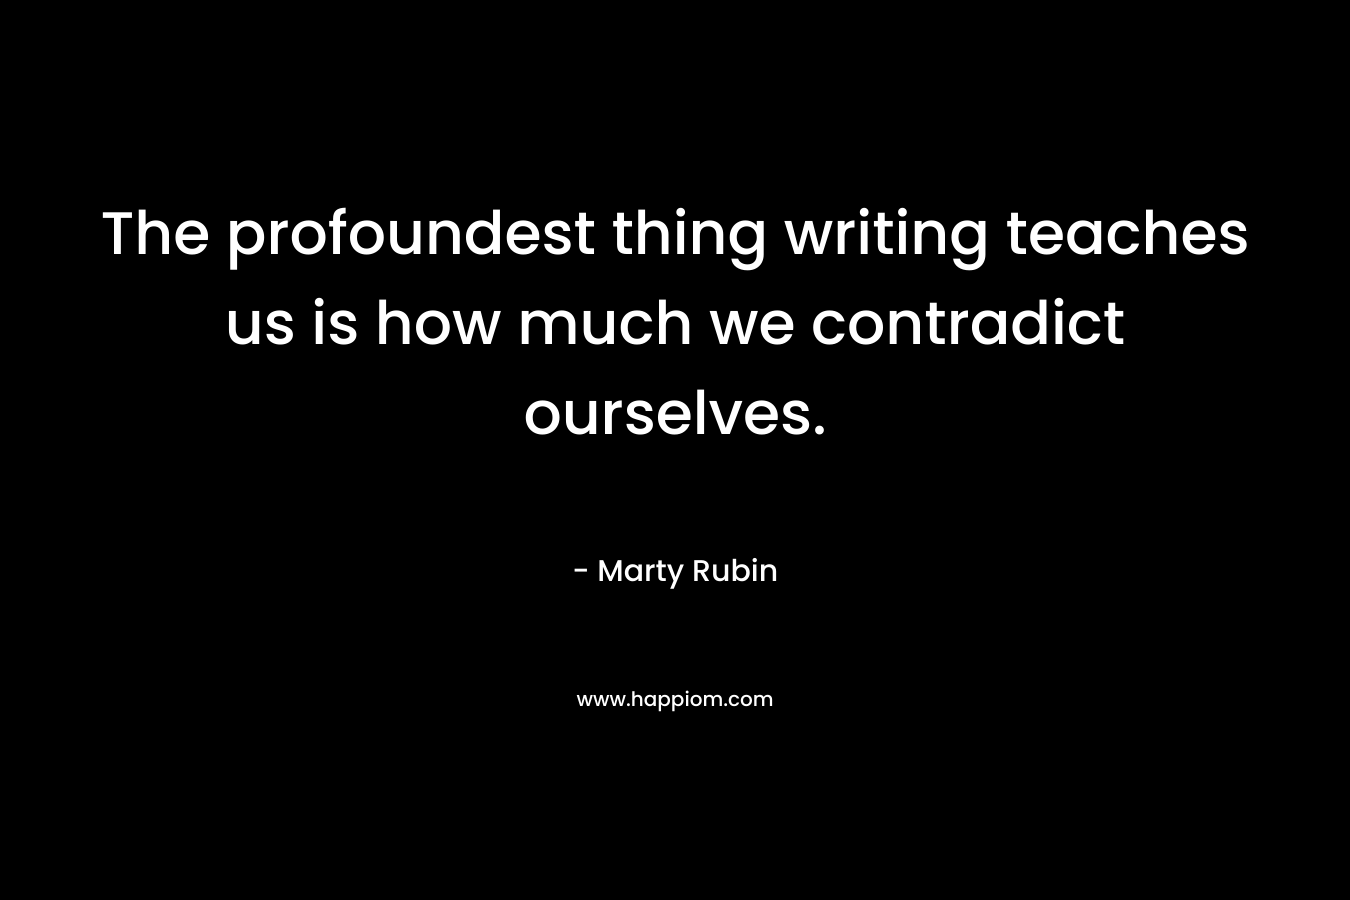 The profoundest thing writing teaches us is how much we contradict ourselves. – Marty Rubin